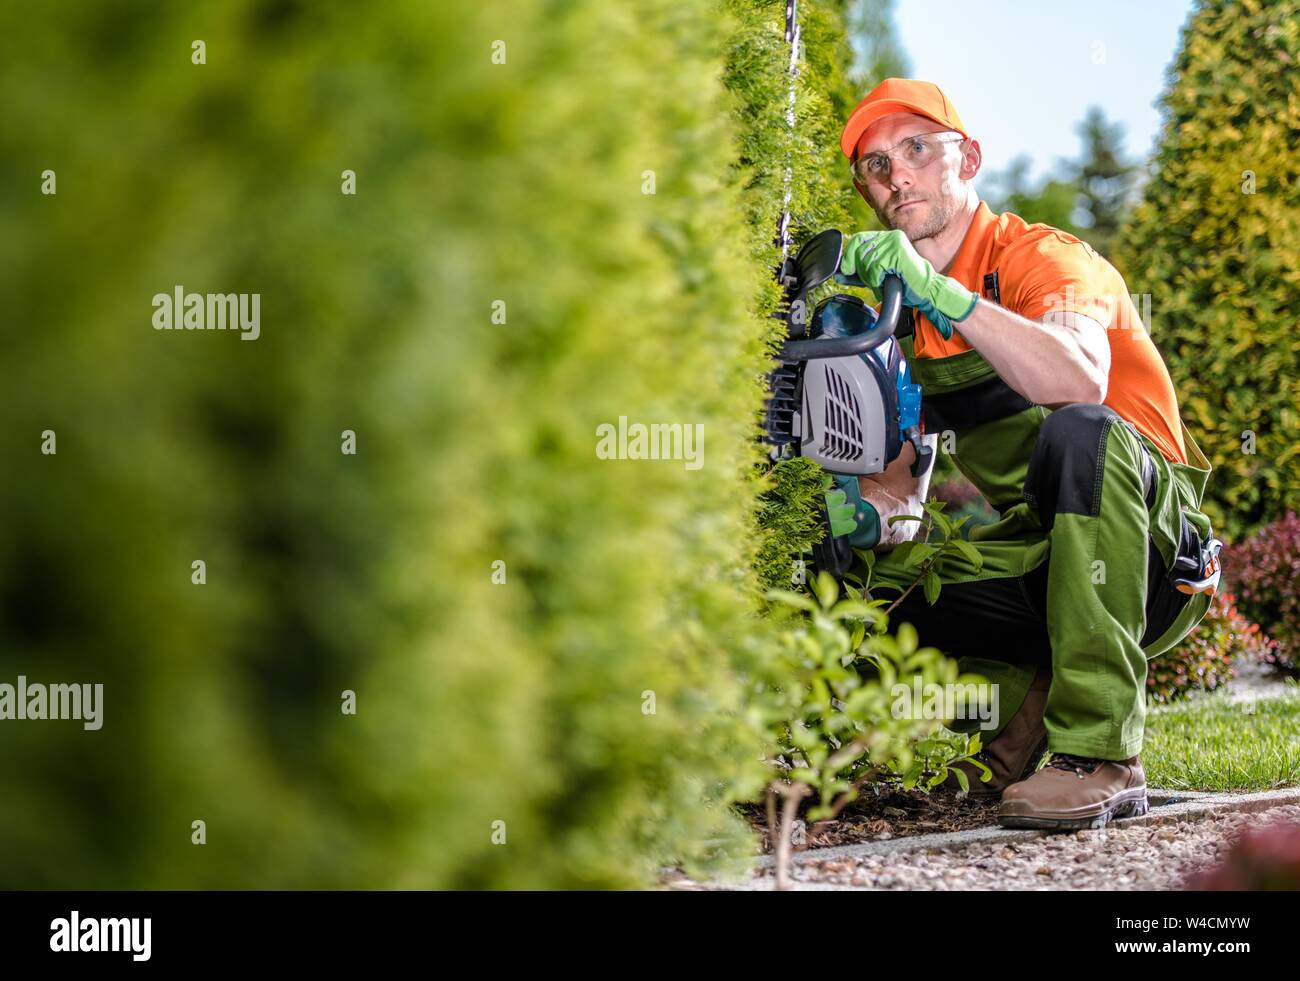 Caucasian Gardener with Gasoline Hedge Trimmer Shaping Wall of Thuja Trees. Hedge Trimmer Works. Stock Photo